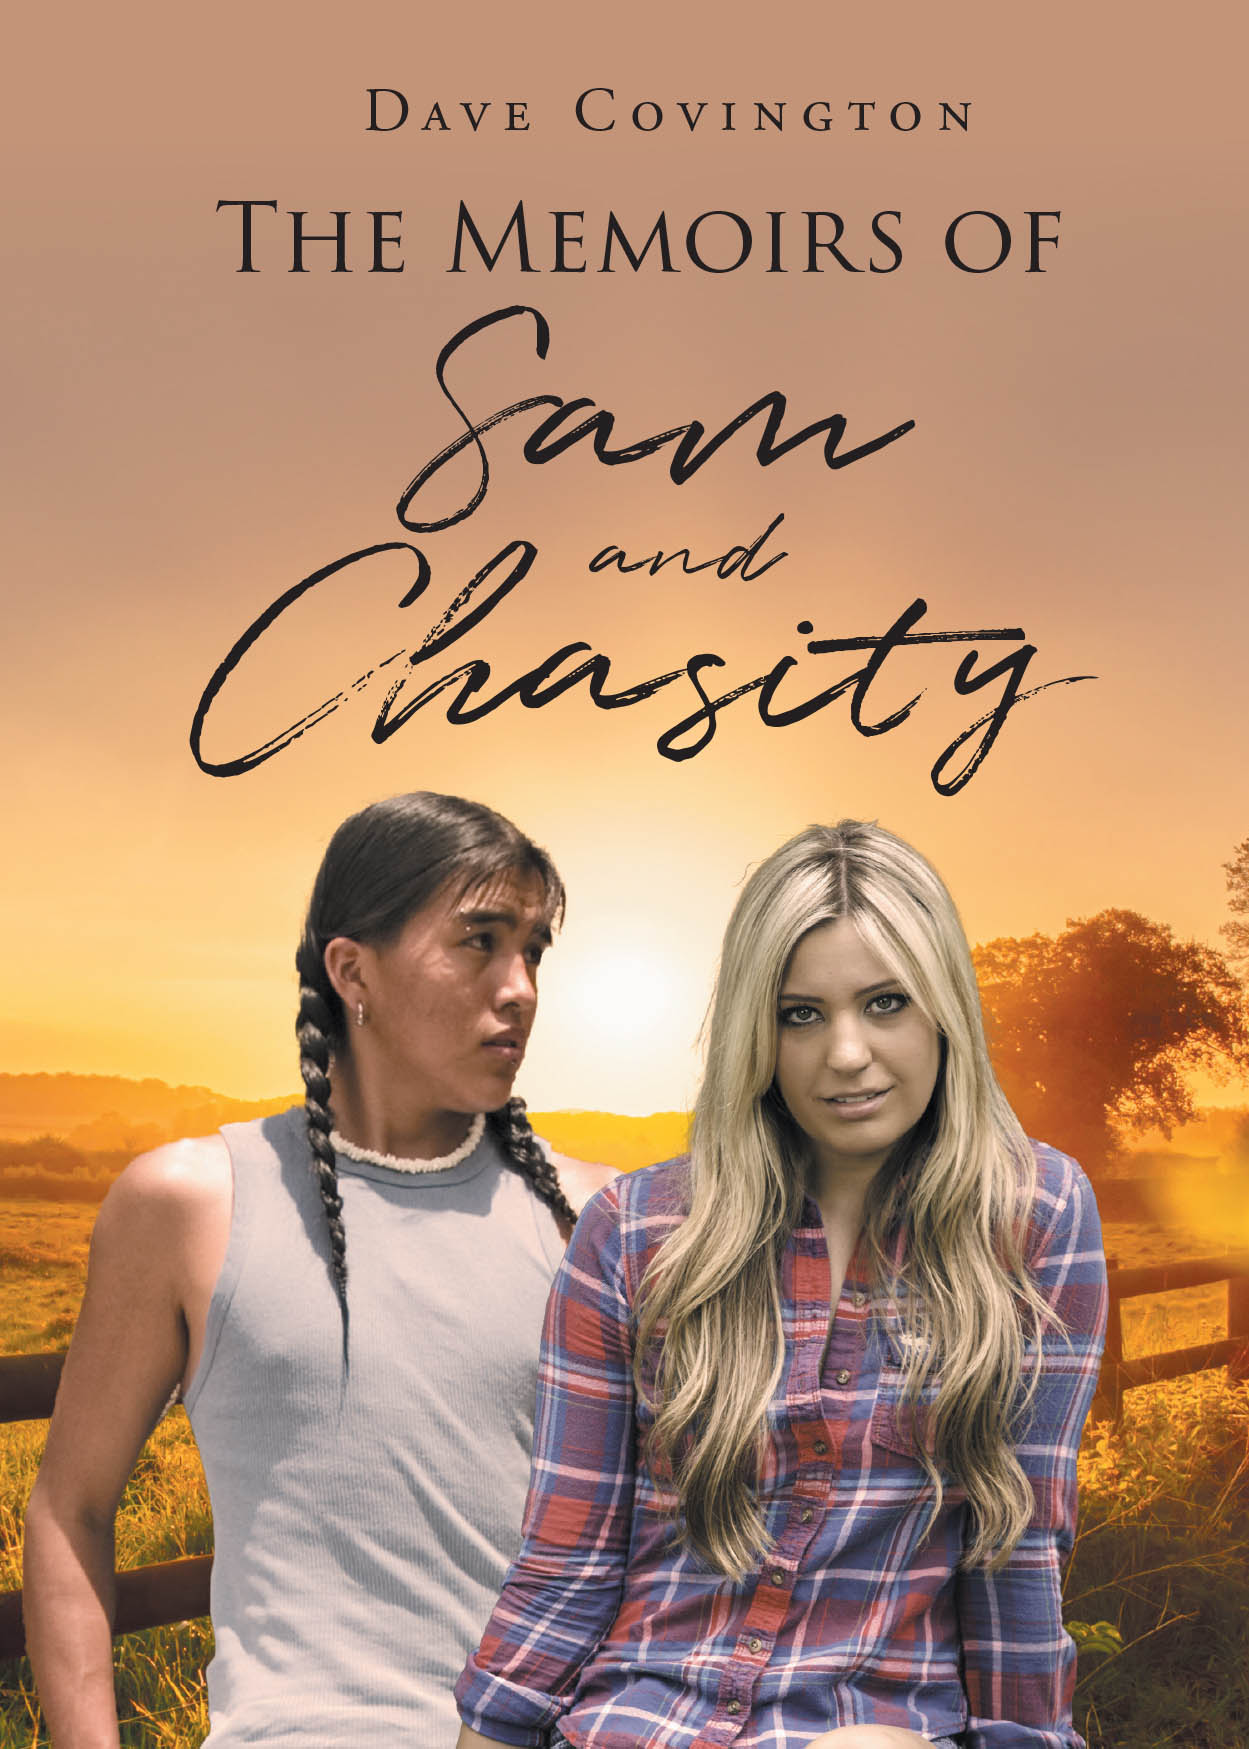 Author Dave Covington’s New Book, "The Memoirs of Sam and Chasity," is a Heartfelt Tale That Delves Into the Challenges of Sustaining Love Through Life’s Trials